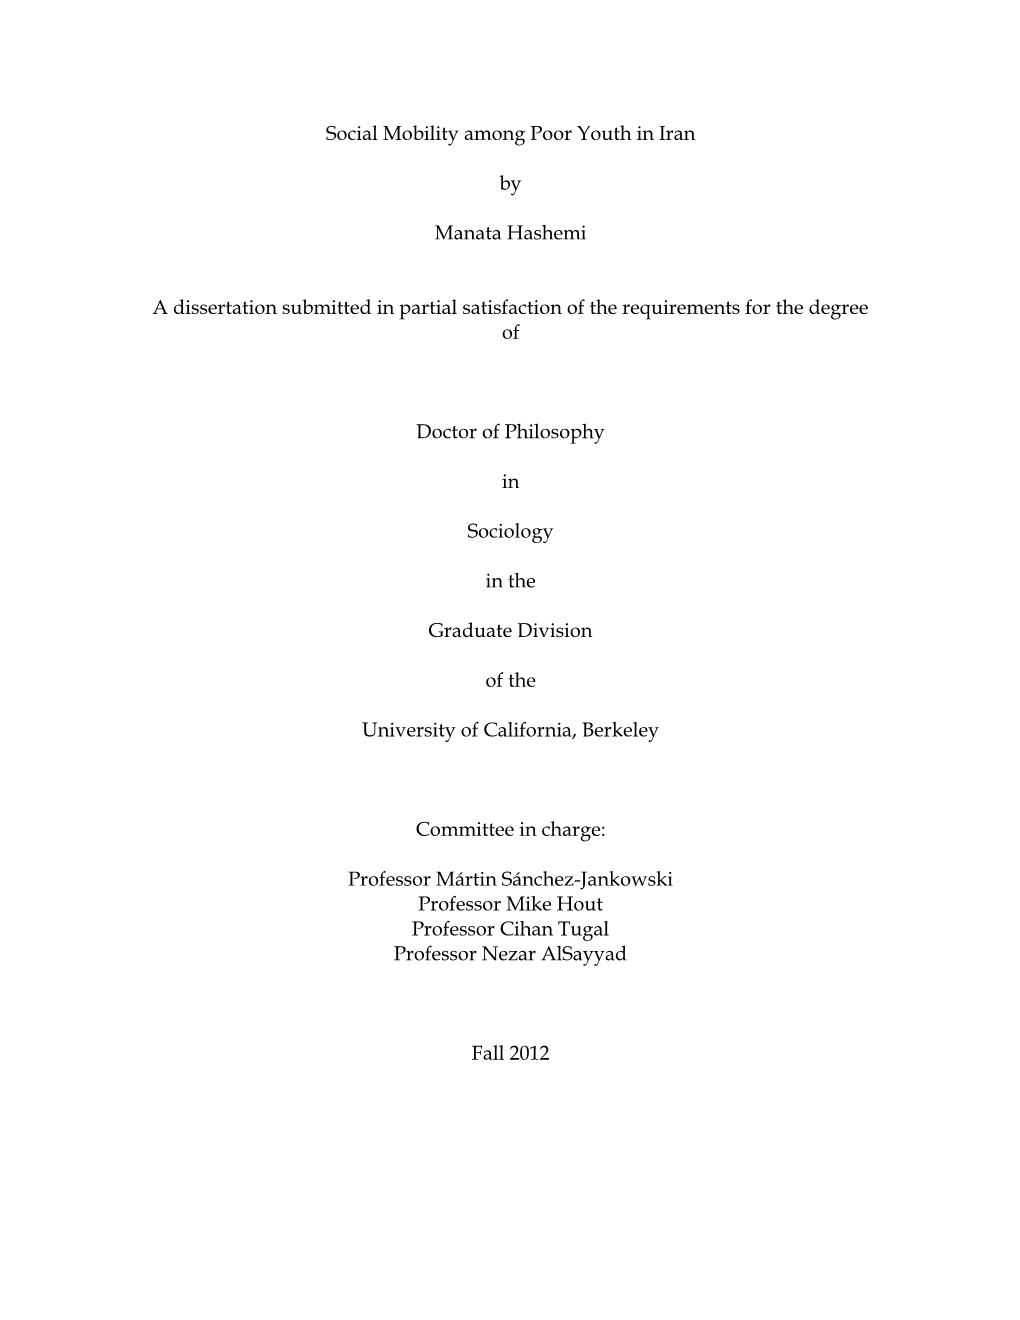 Social Mobility Among Poor Youth in Iran by Manata Hashemi a Dissertation Submitted in Partial Satisfaction of the Requirements